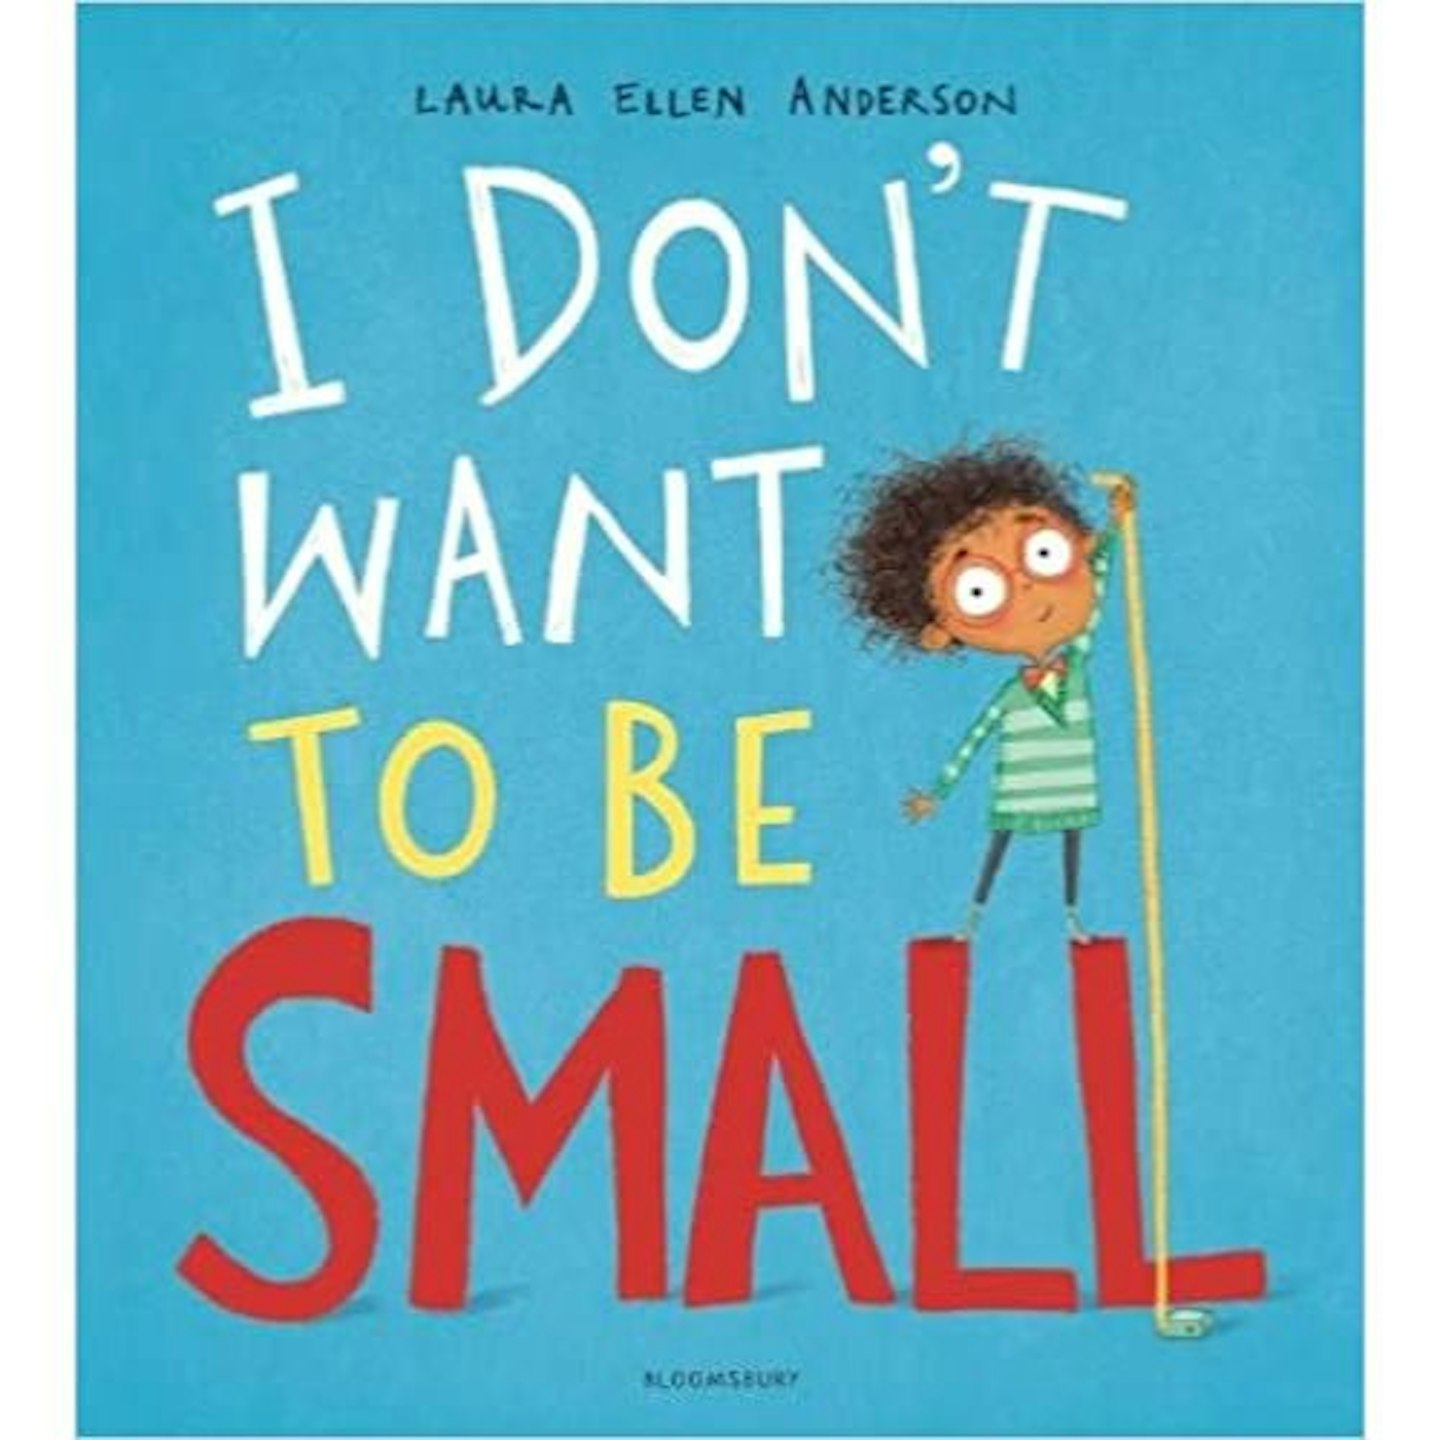 I Don't Want to be Small by Laura Ellen Anderson